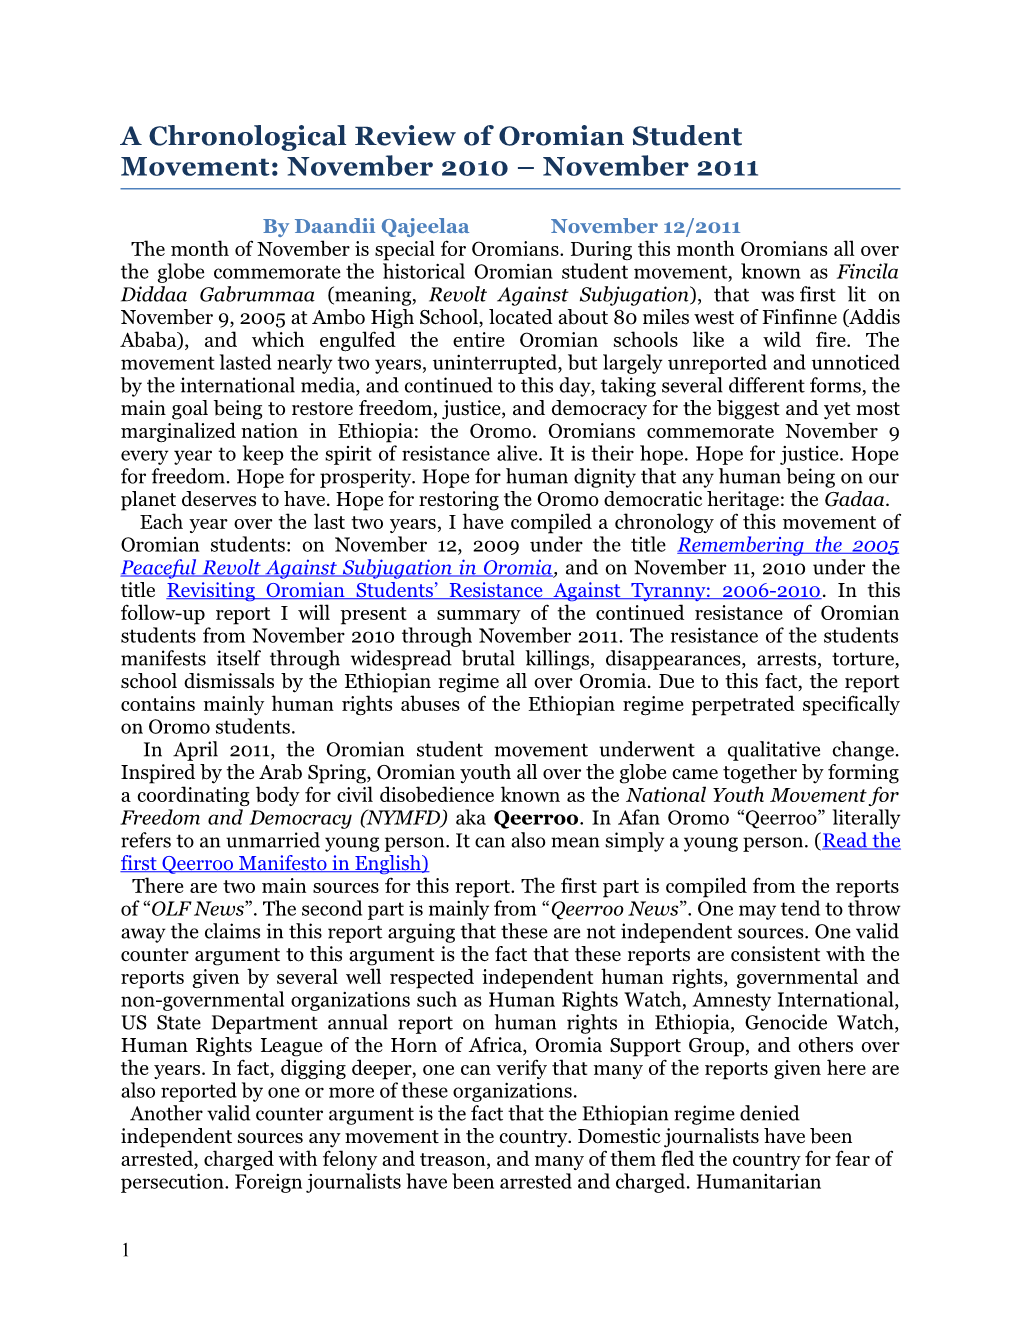 A Chronological Review of Oromian Student Movement: November 2010 November 2011